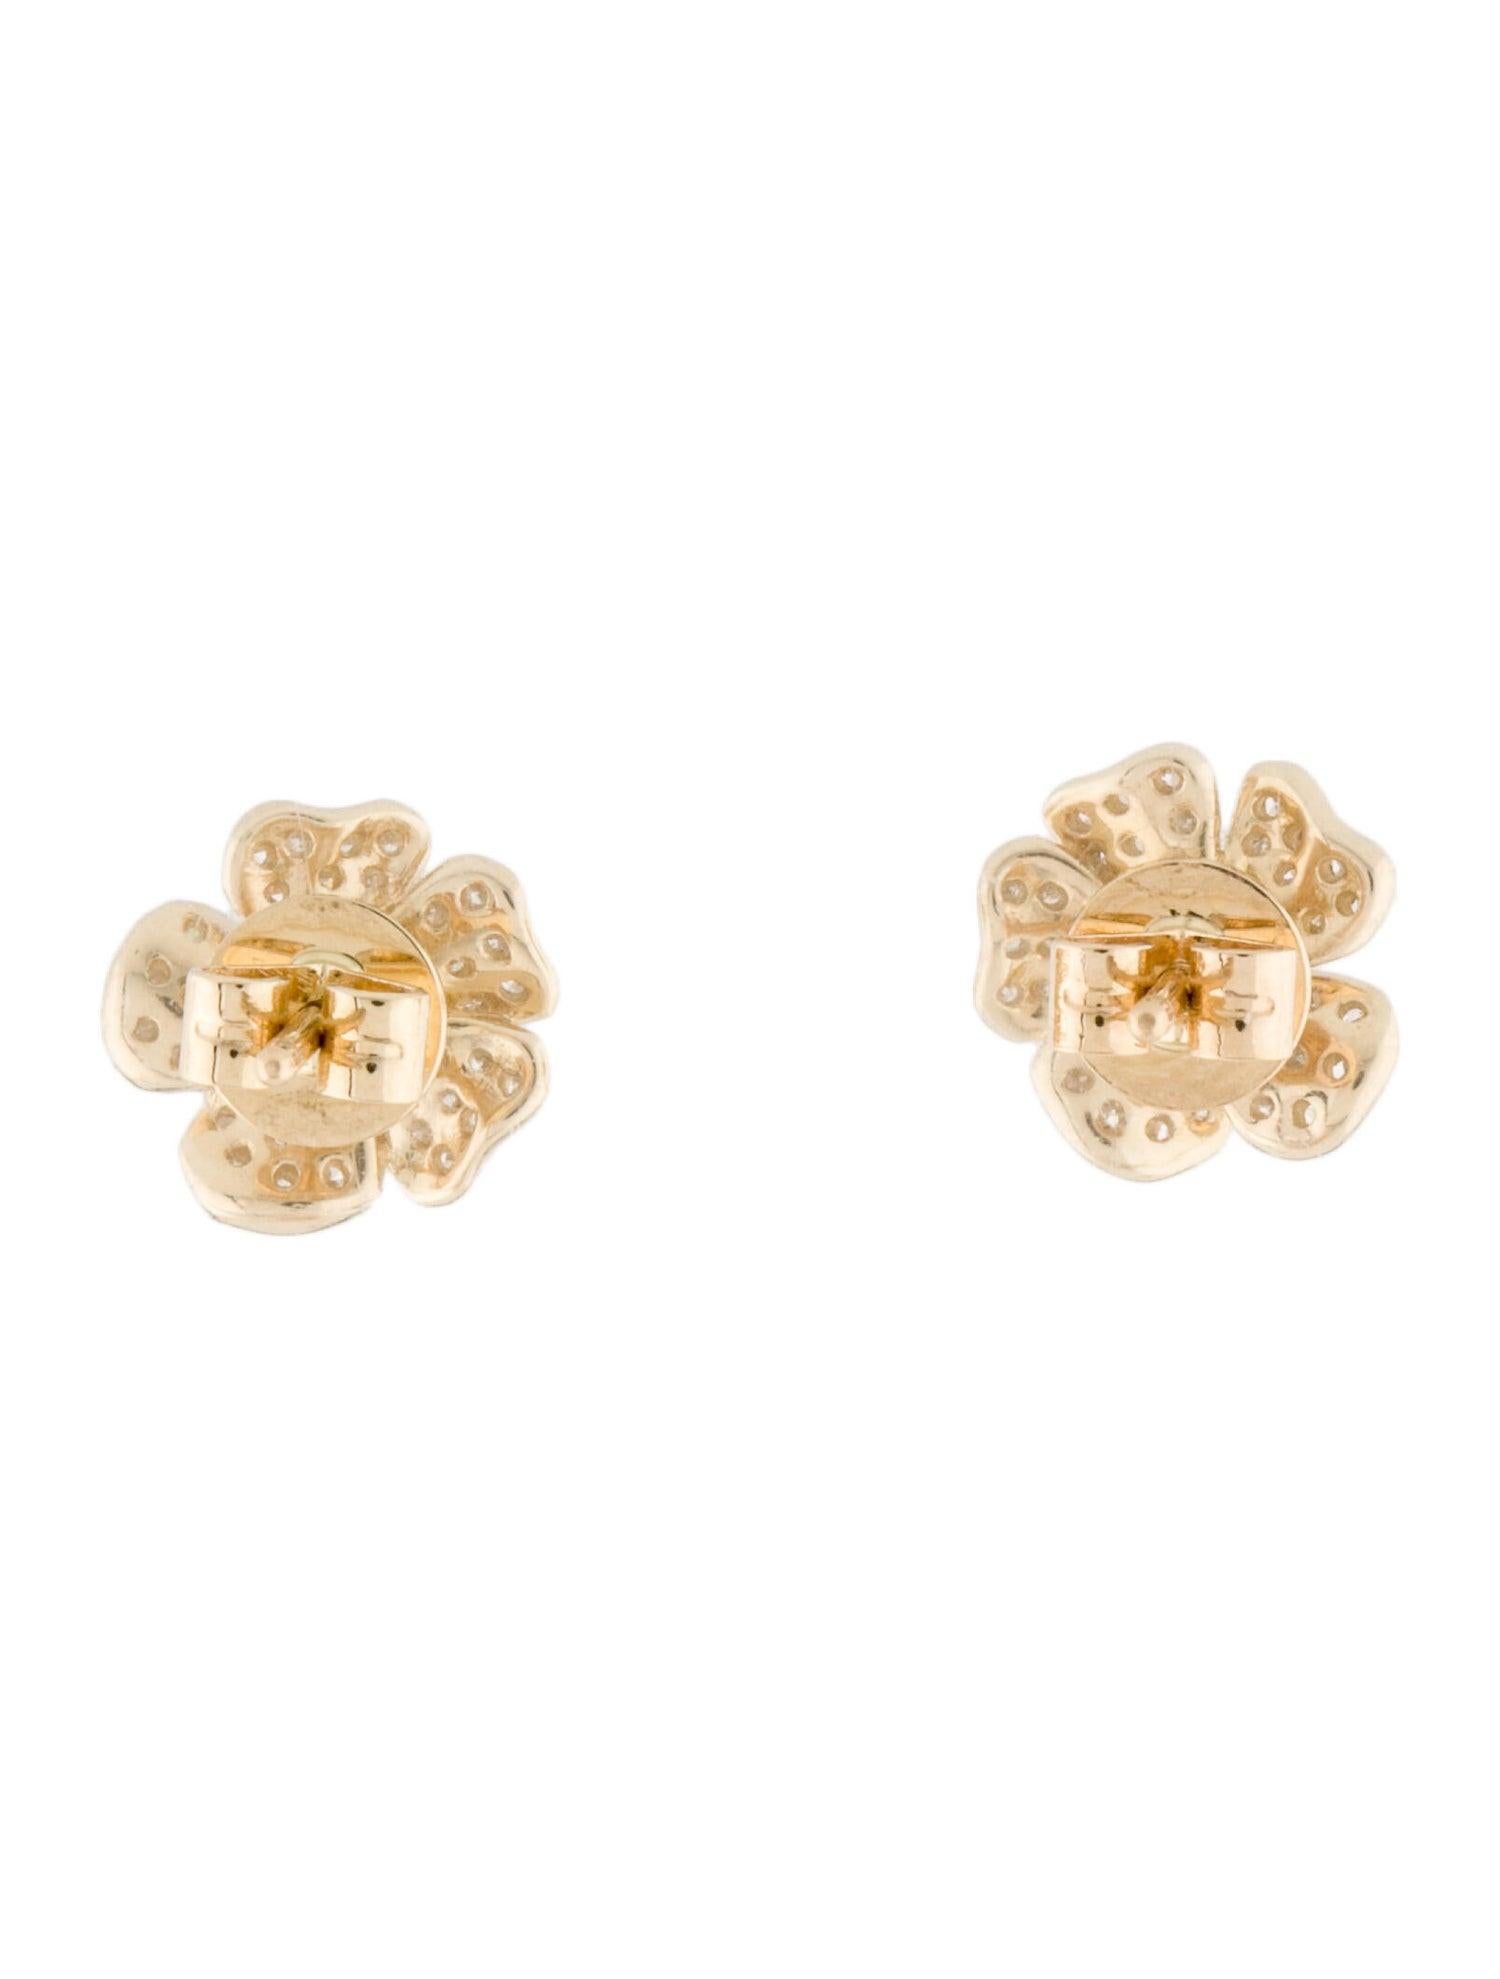 14 Karat Yellow Gold 0.34 Carat Diamond Flower Stud Earrings In New Condition For Sale In Great neck, NY